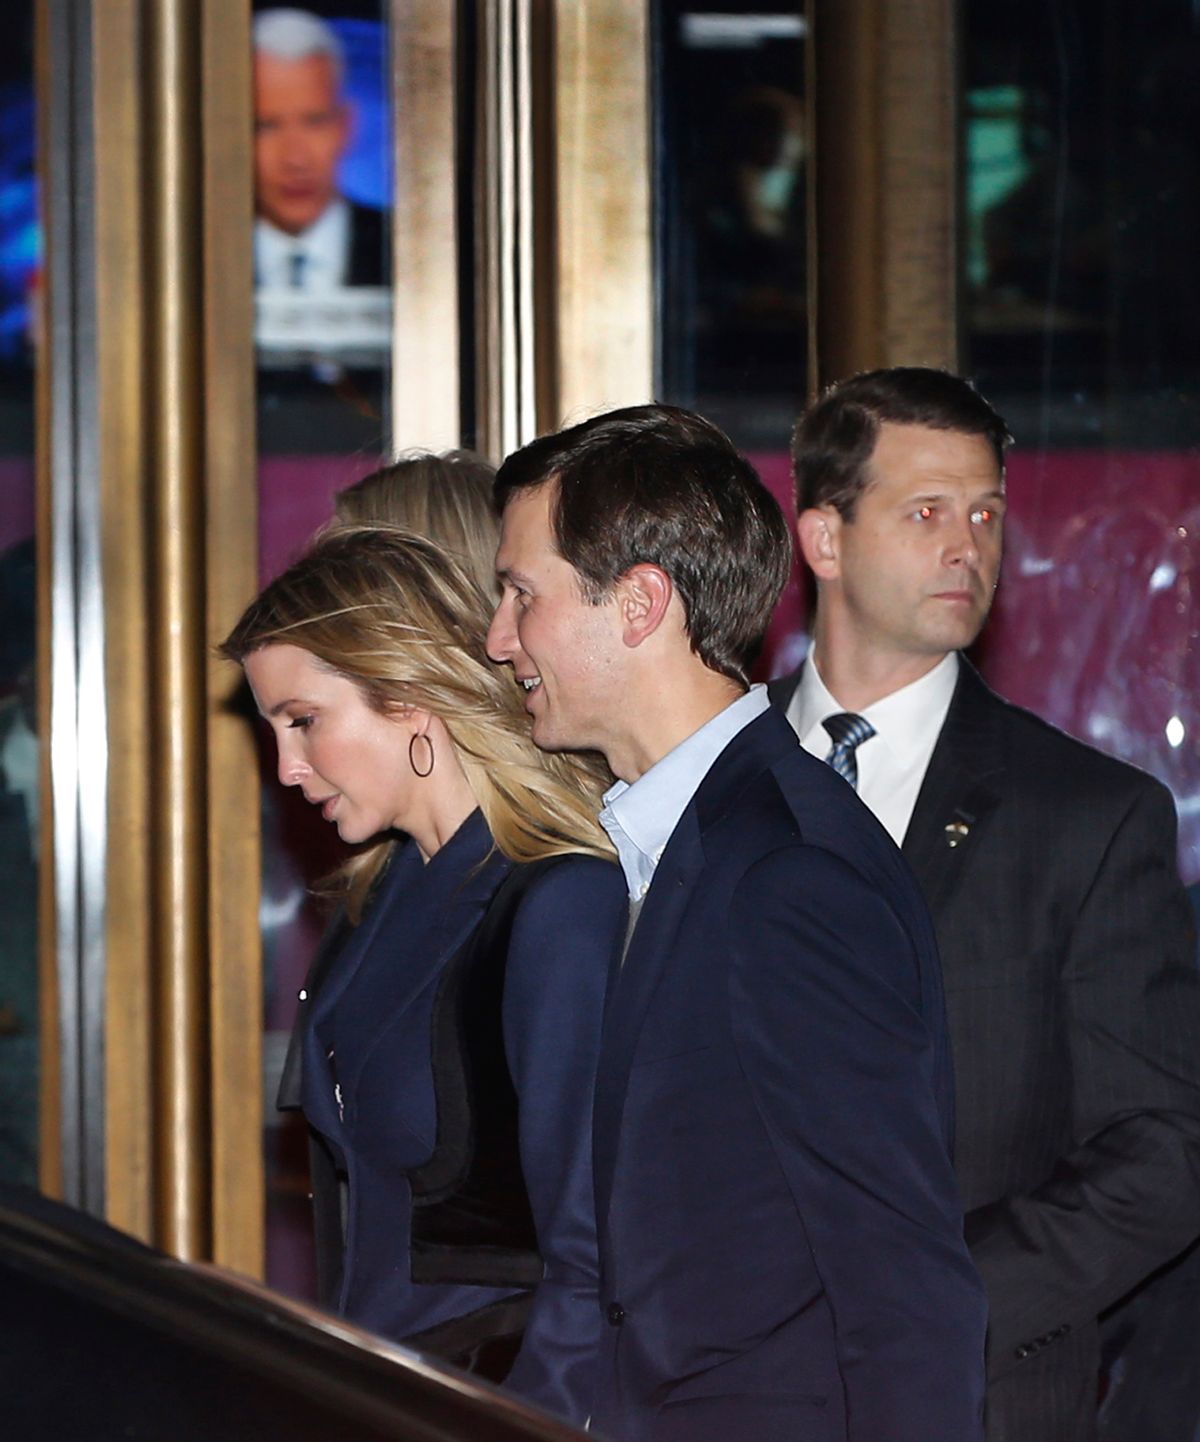 Ivanka Trump and her husband Jared Kushner walk past the Paley Center for Media as they leave the 21 Club after dining with President-elect Donald Trump on Tuesday, Nov. 15, 2016, in New York. (AP Photo/Kathy Willens) (AP Photo/Kathy Willens)